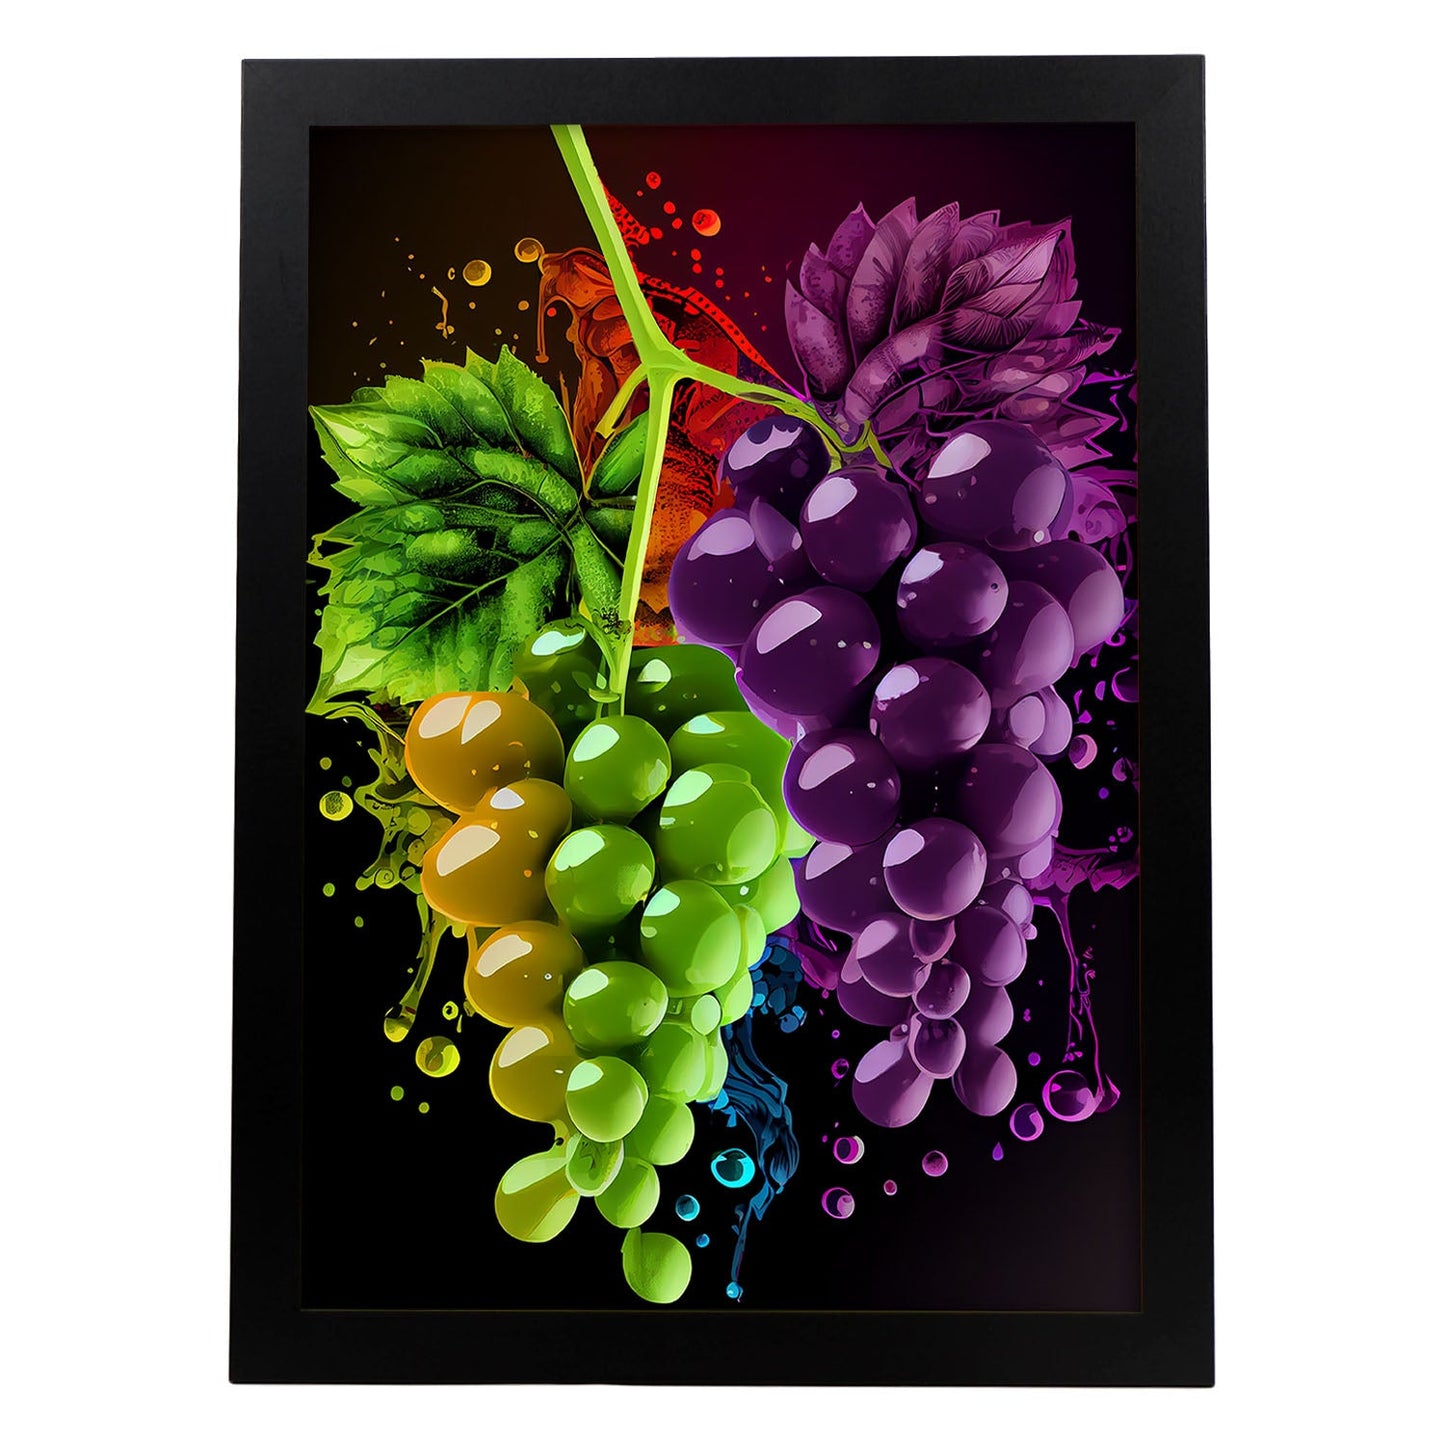 Nacnic Grapes Pop Art. Aesthetic Wall Art Prints for Bedroom or Living Room Design.